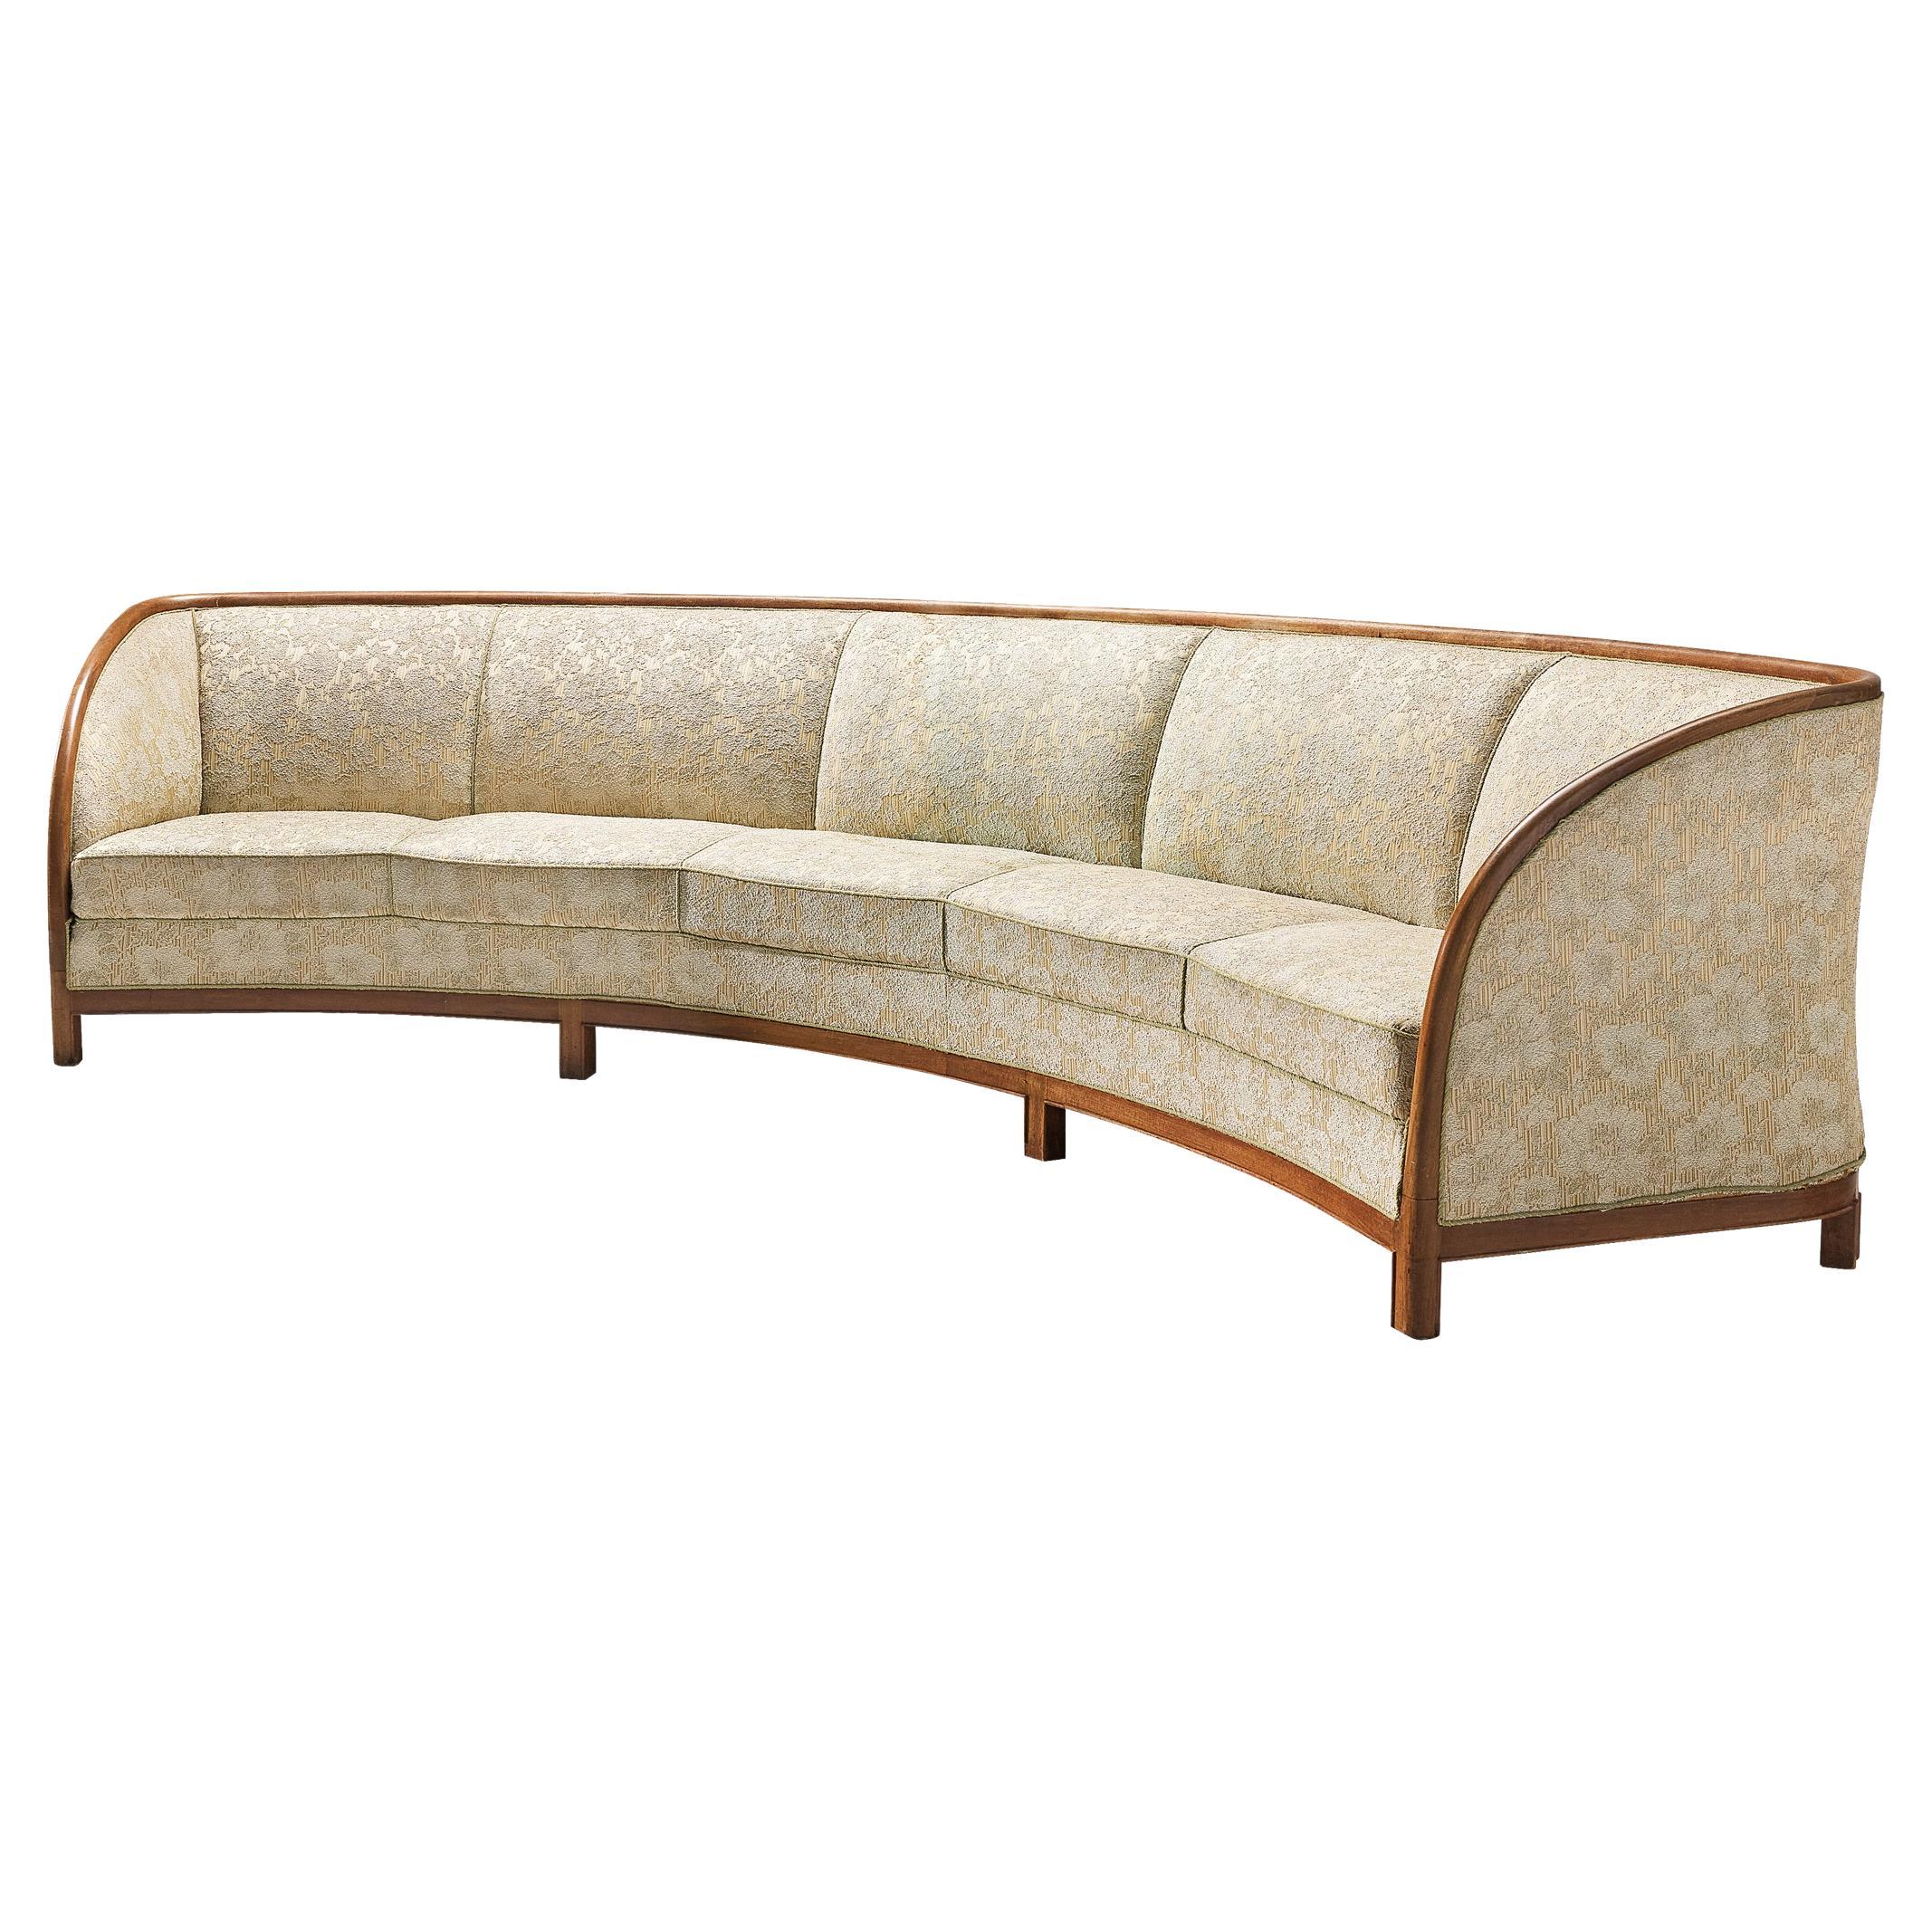 Large Curved Danish Sofa in Light Fabric Upholstery For Sale